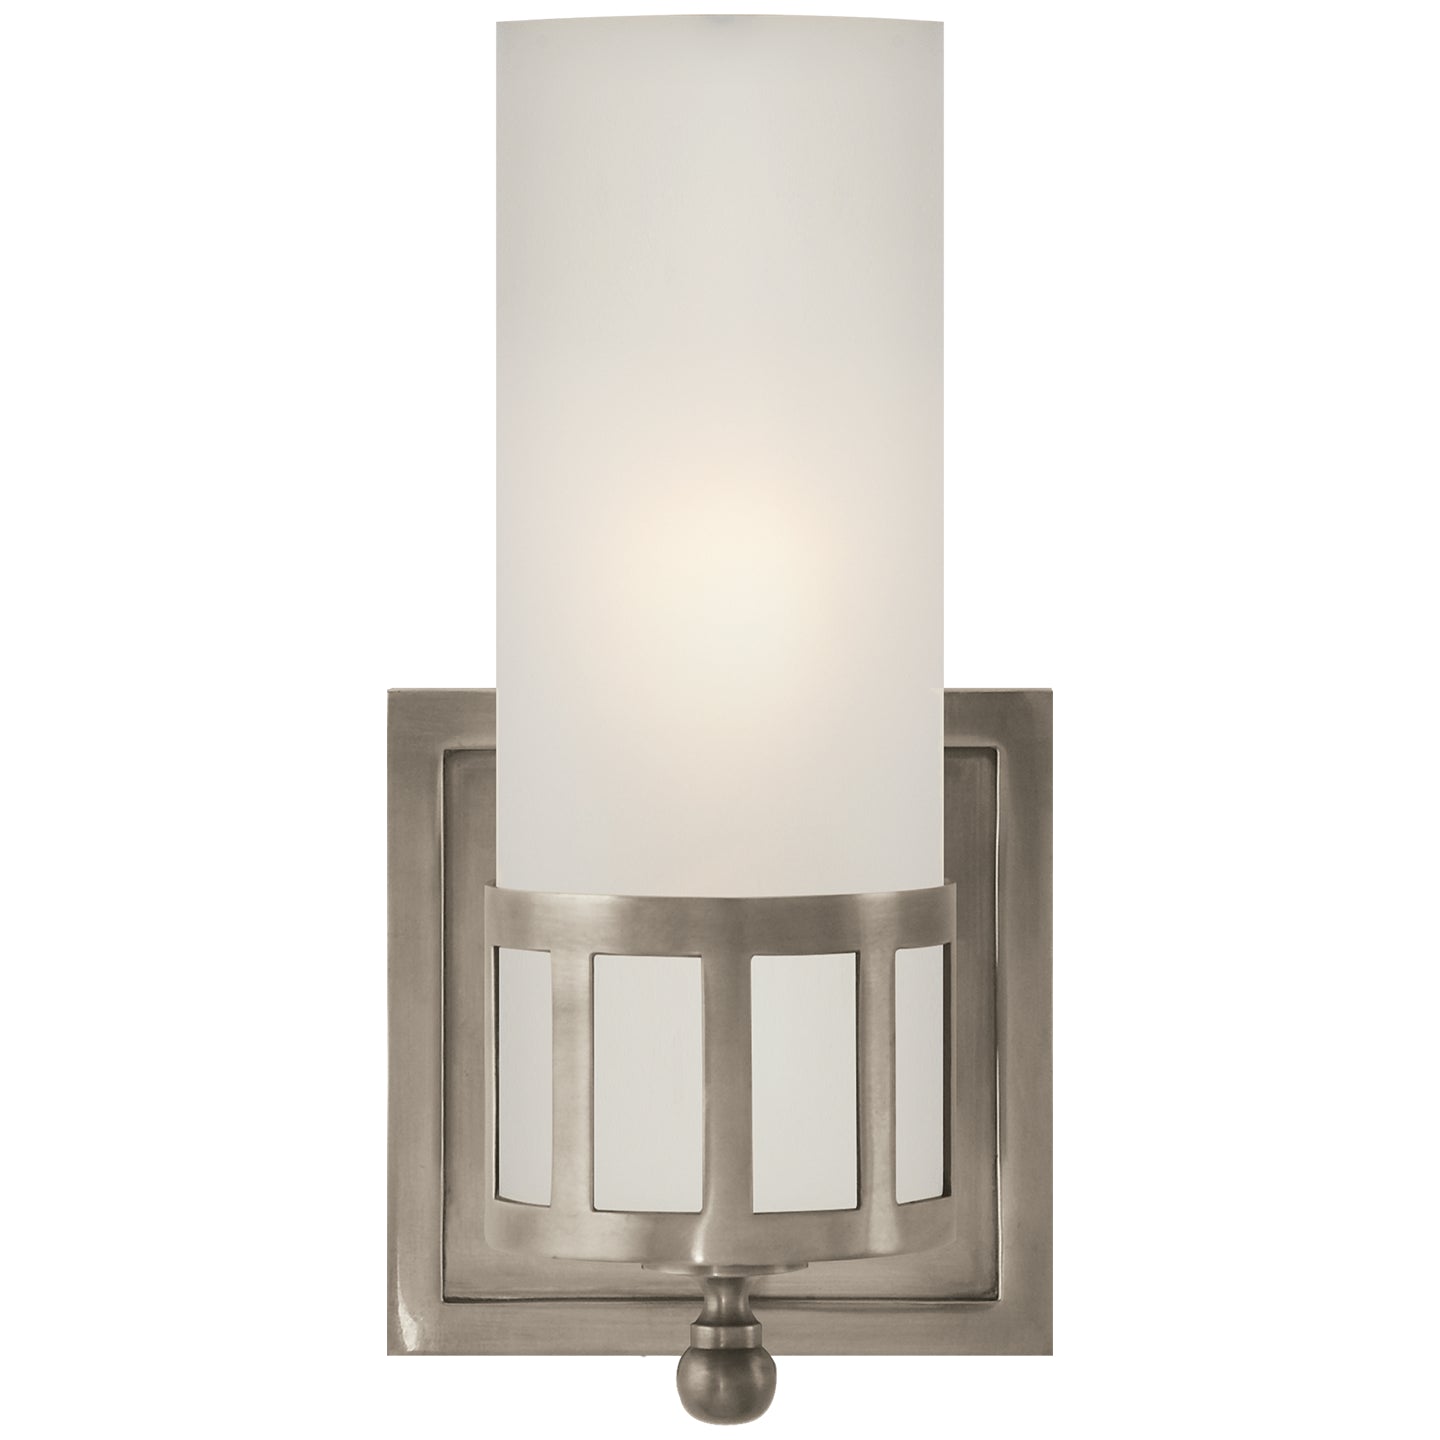 Load image into Gallery viewer, Visual Comfort Signature - SS 2011AN-FG - One Light Wall Sconce - Openwork - Antique Nickel
